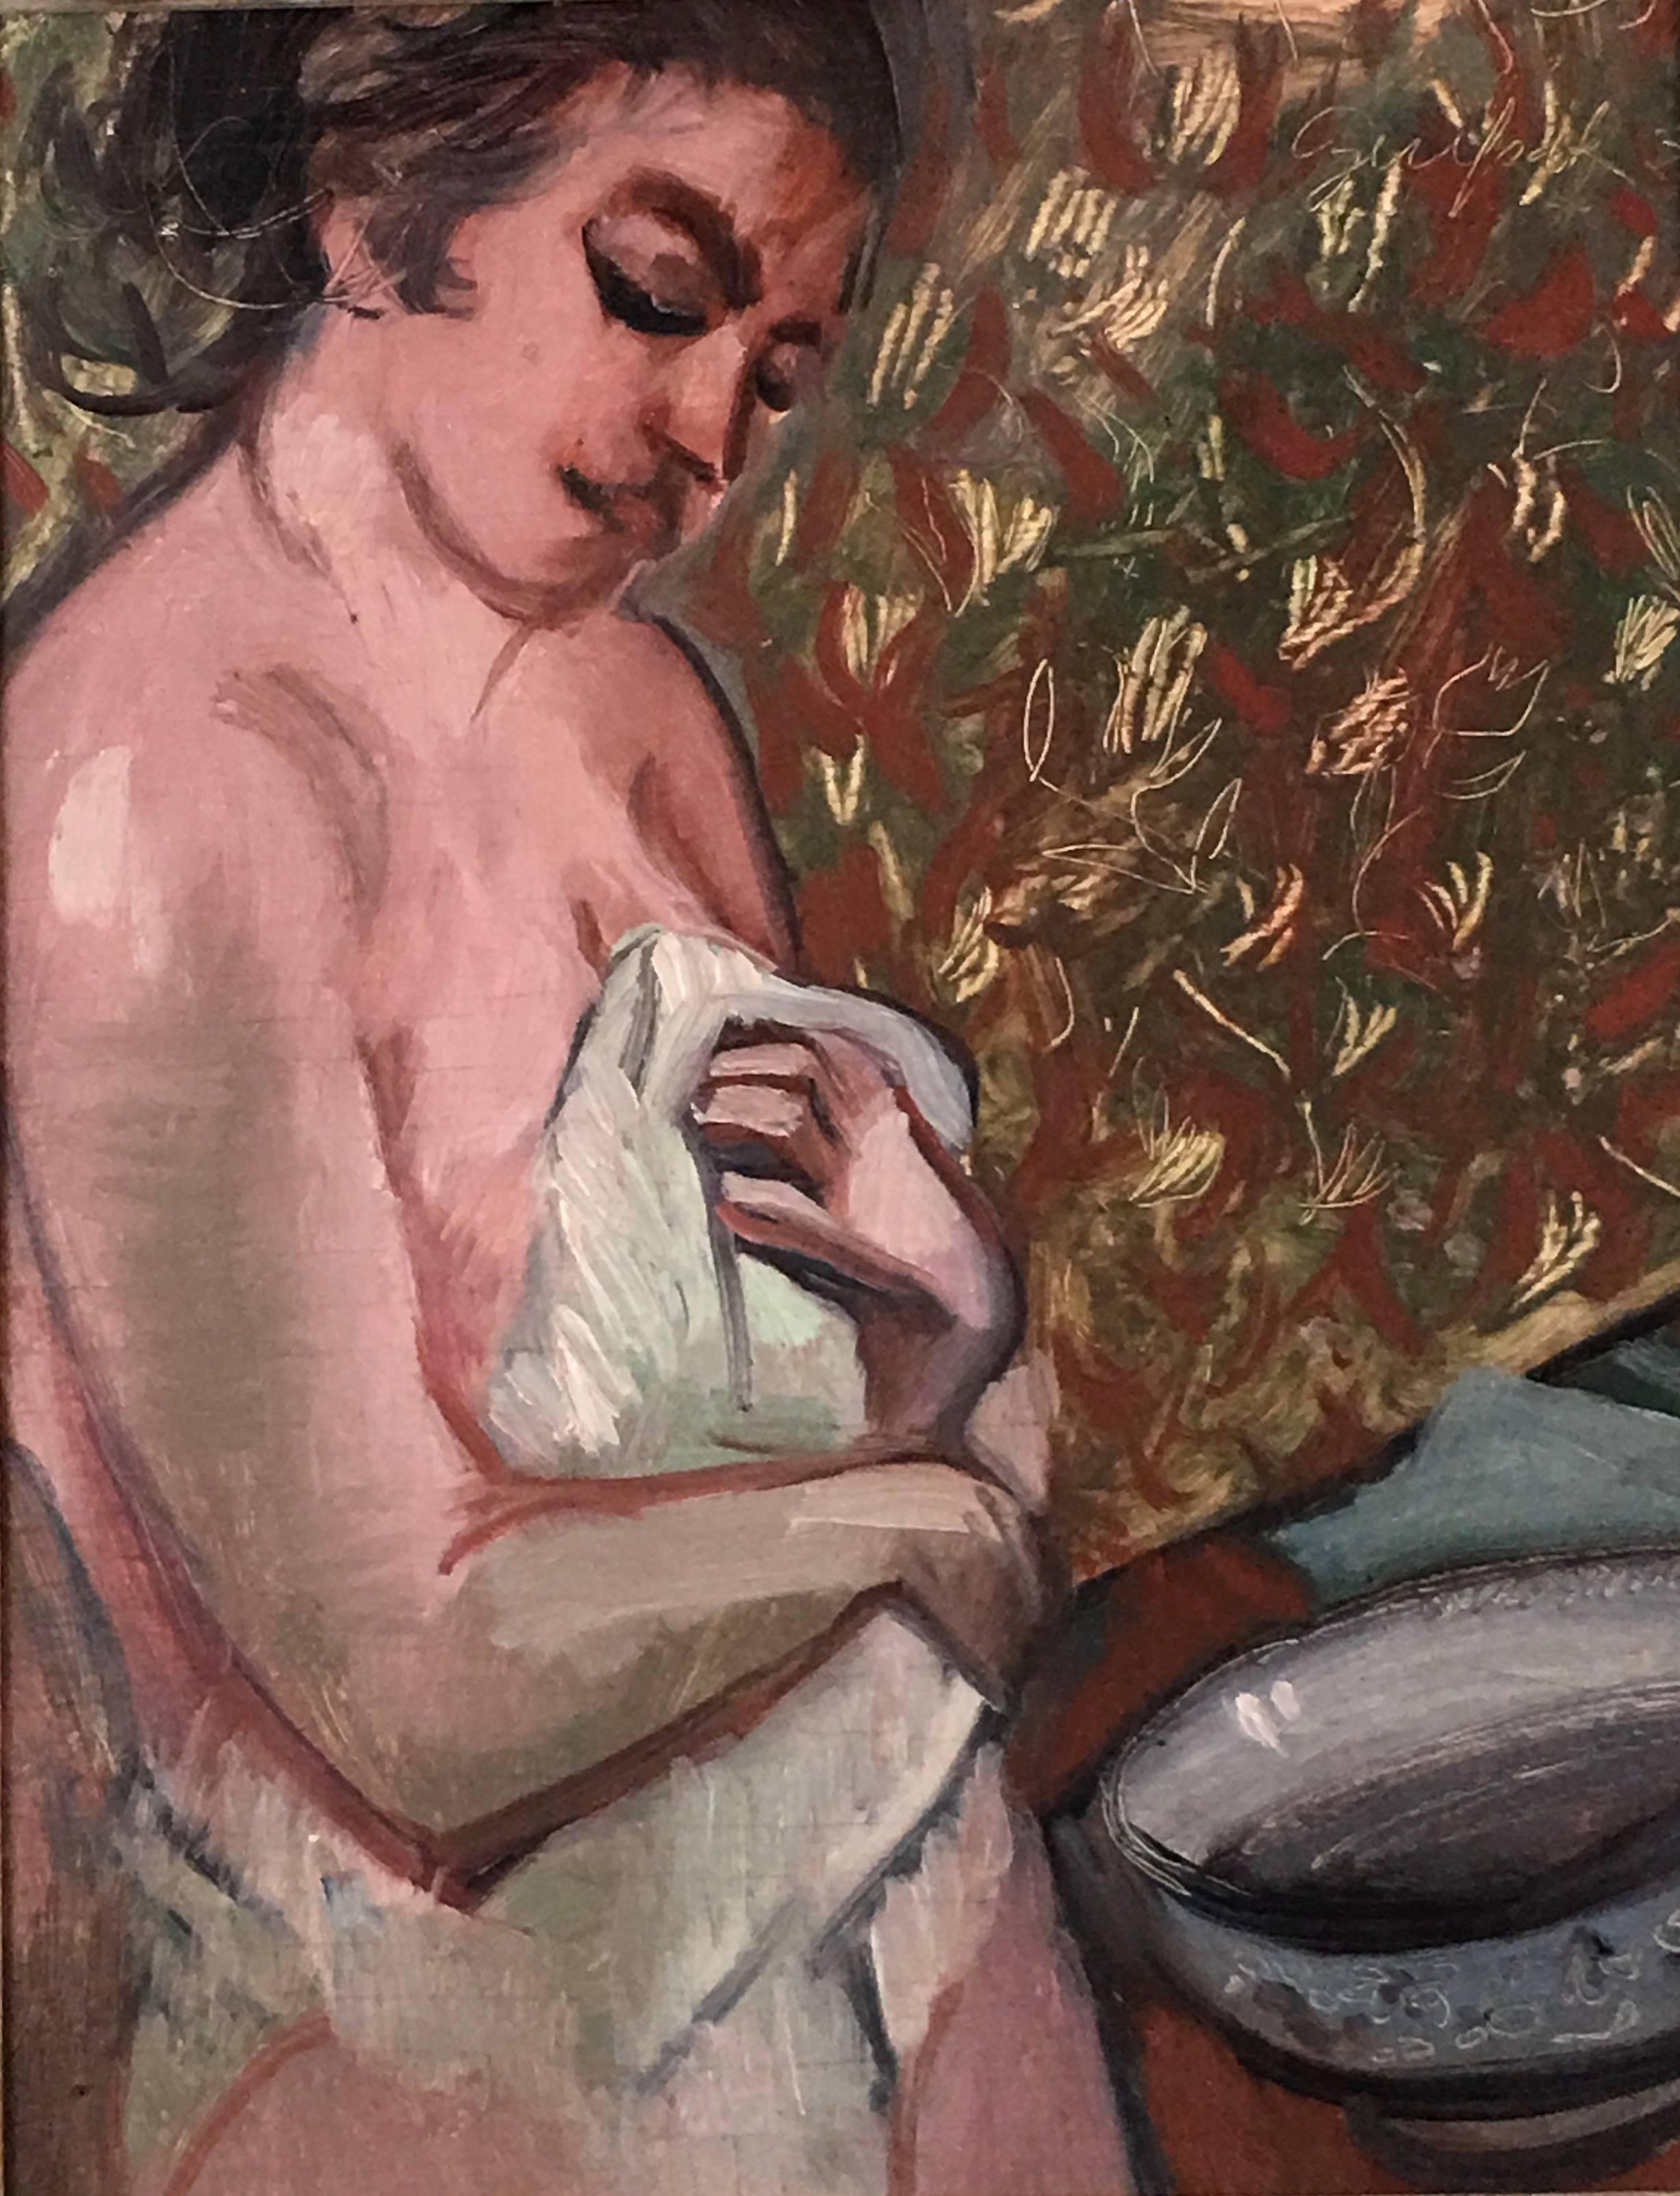 Alfred (Al) Czerepak (1928-1986) oil on board painting of a female bather against a patterned wallpaper background, painted with a rich palette of colors and incised mark making, in a carved wood frame, also made by the artist who was among the most